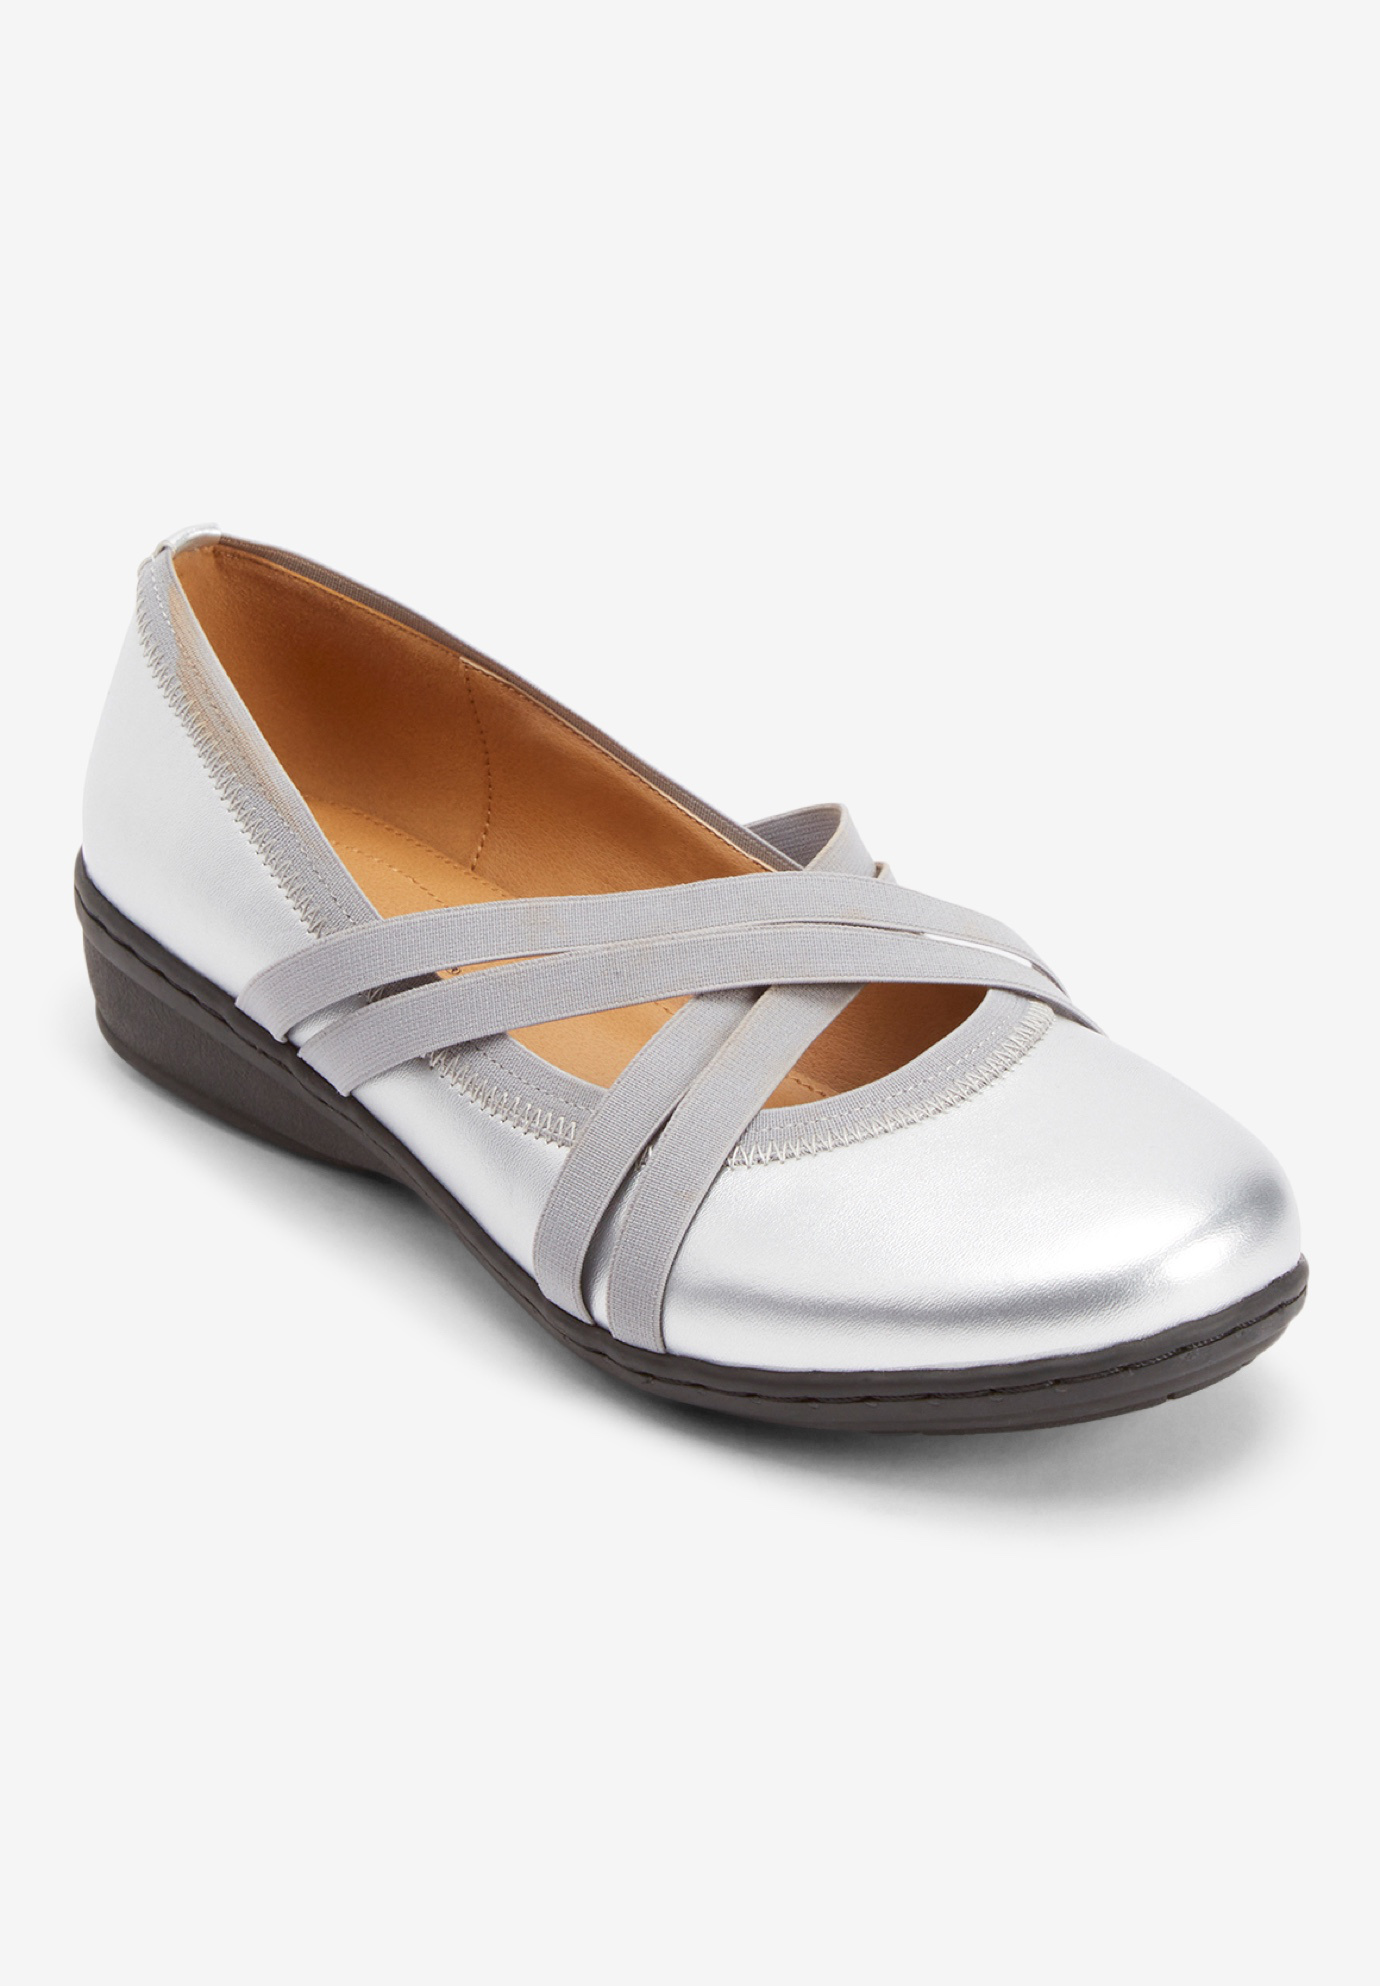 The Ari Flat by Comfortview, 